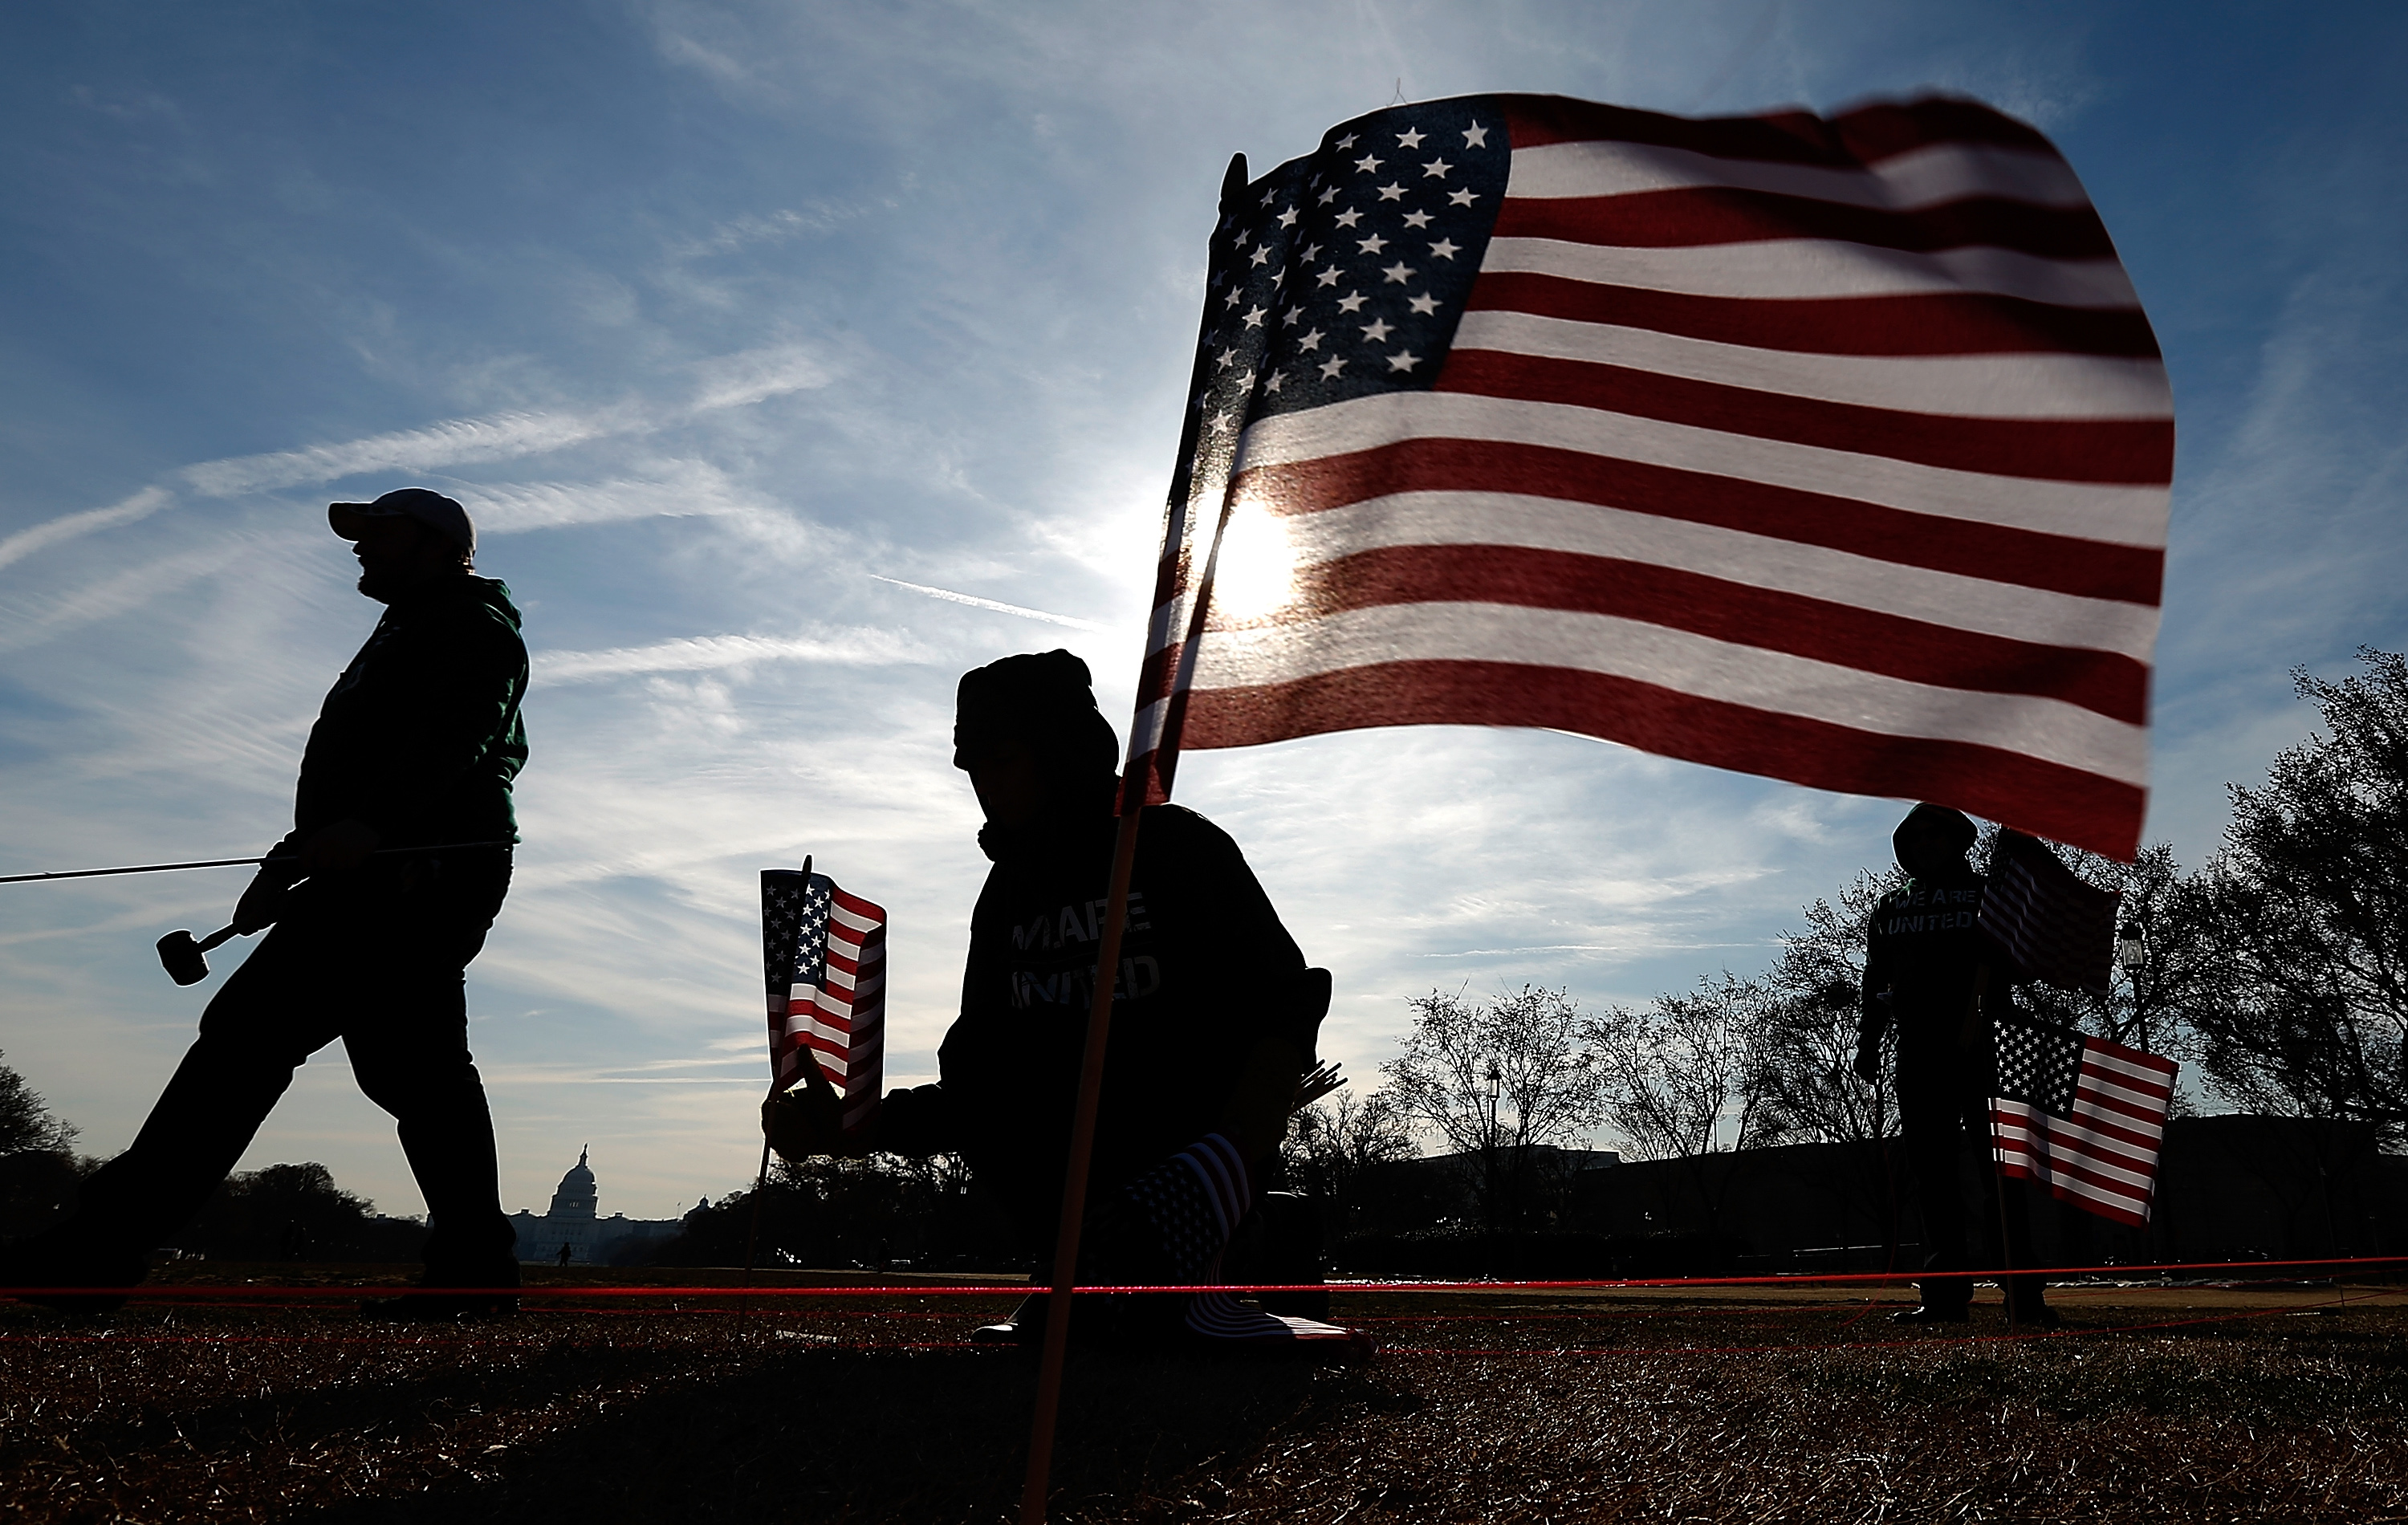 U.S. military veterans set up 1,892 American flags on the National Mall March 27, 2014 in Washington, DC. The Iraq and Afghanistan Veterans of America installed the flags to represent the 1,892 veterans and service members who committed suicide this year. (Win McNamee&amp;mdash;Getty Images)